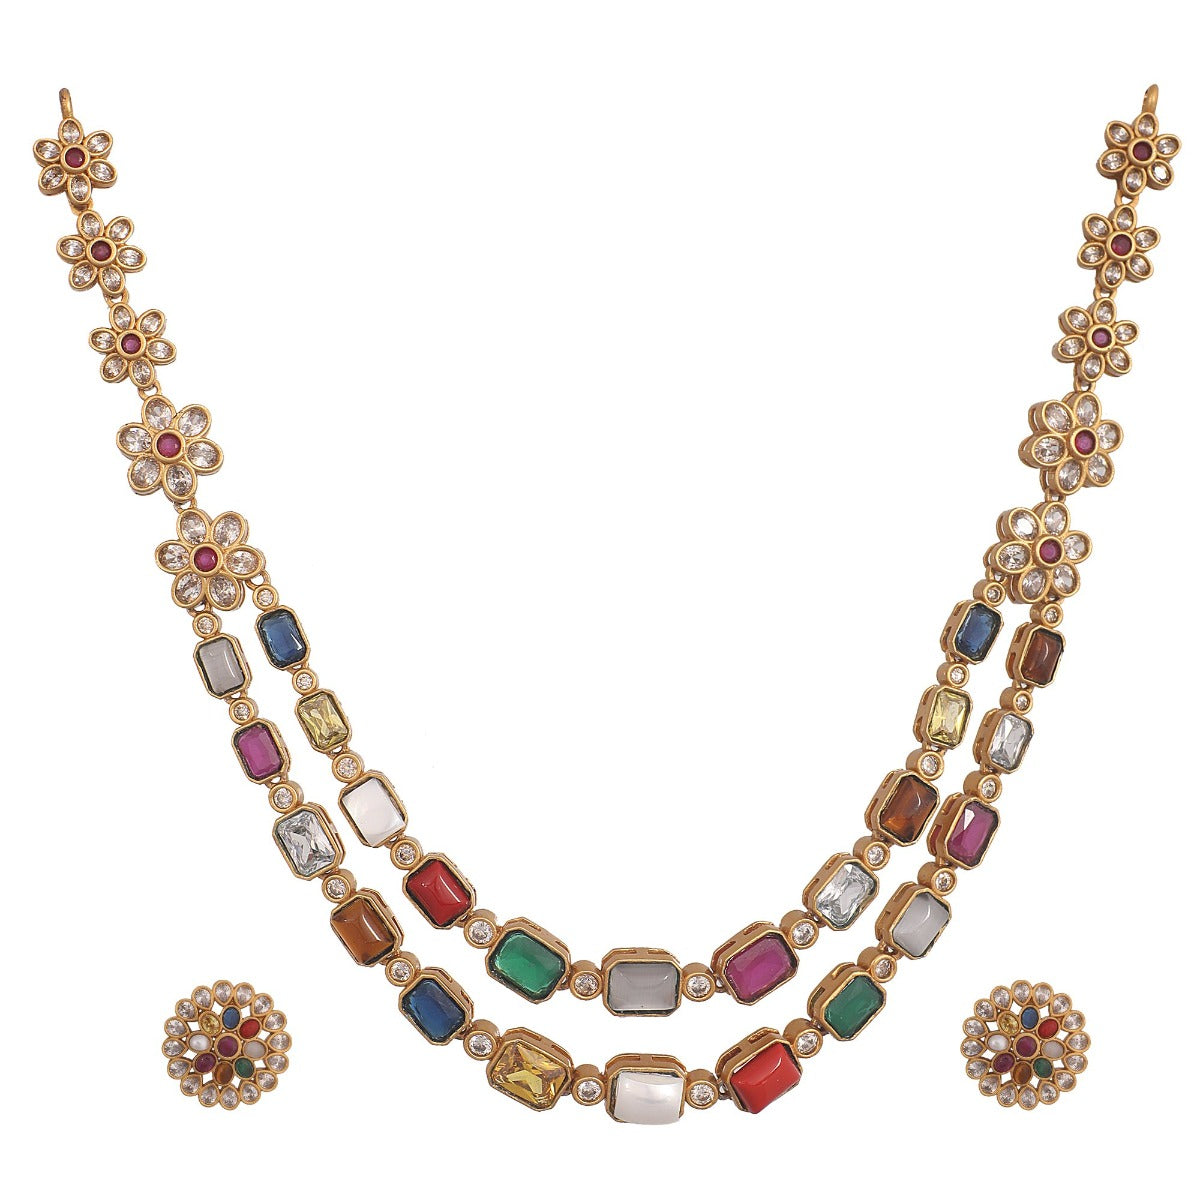 Antique Gold Plated Pahal Navaratna Necklace Earring Set 